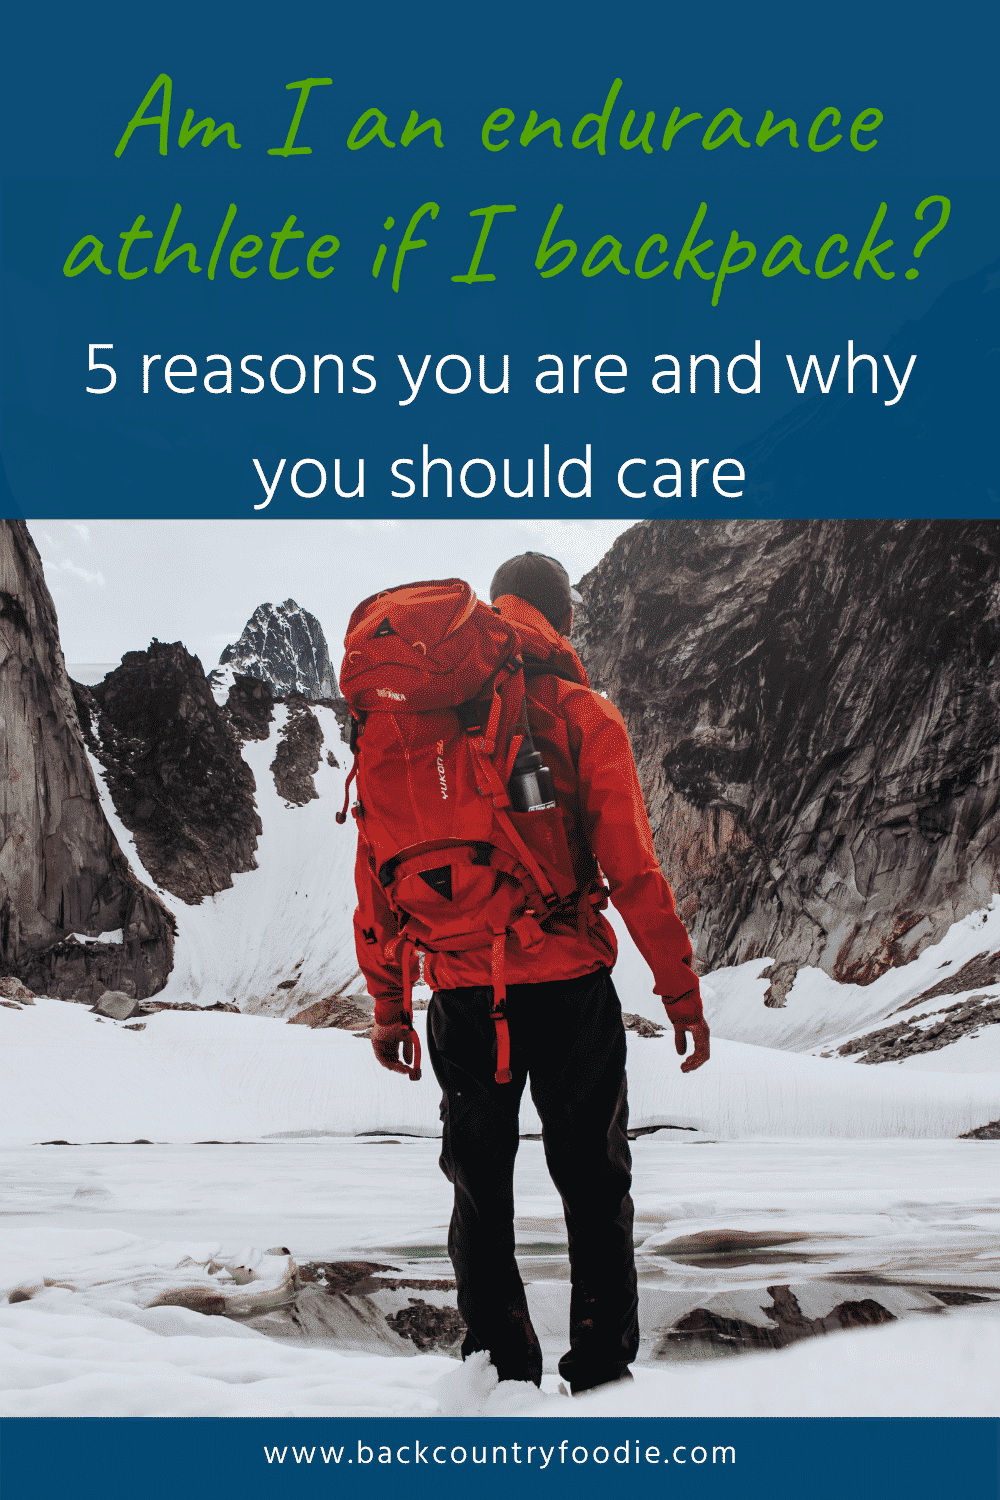 Have you ever wondered if backpackers are endurance athletes? Backpacking is unlike any other sport because of the unique physical conditioning it requires. This post explains 5 reasons backpackers are athletes and why they should fuel like athletes. #backcountryfoodie #backpacking #hikingtraining #hikingplan